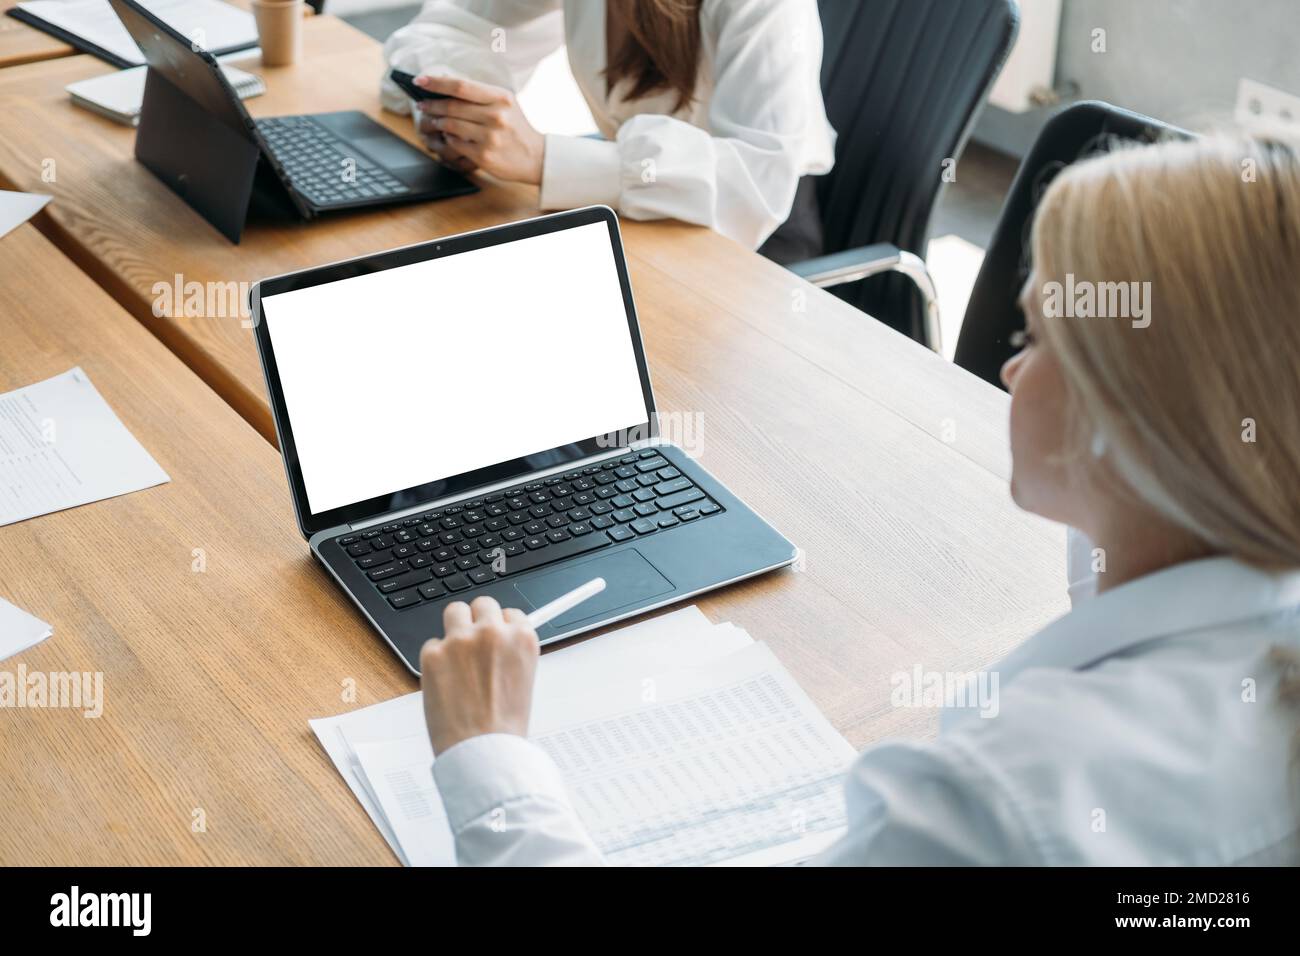 business consulting office workers digital mockup Stock Photo